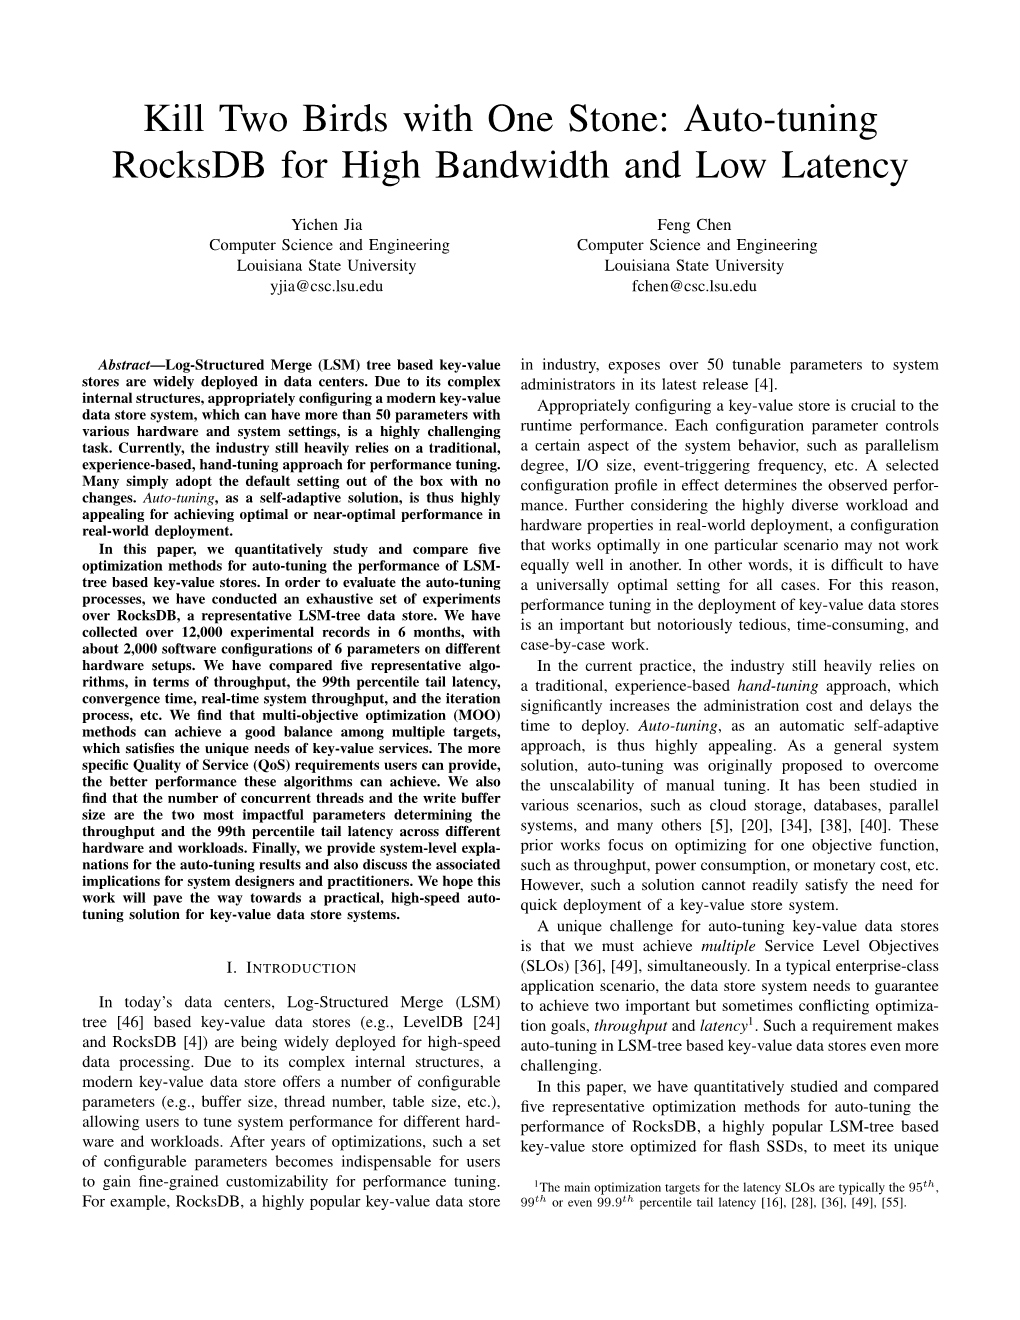 Auto-Tuning Rocksdb for High Bandwidth and Low Latency